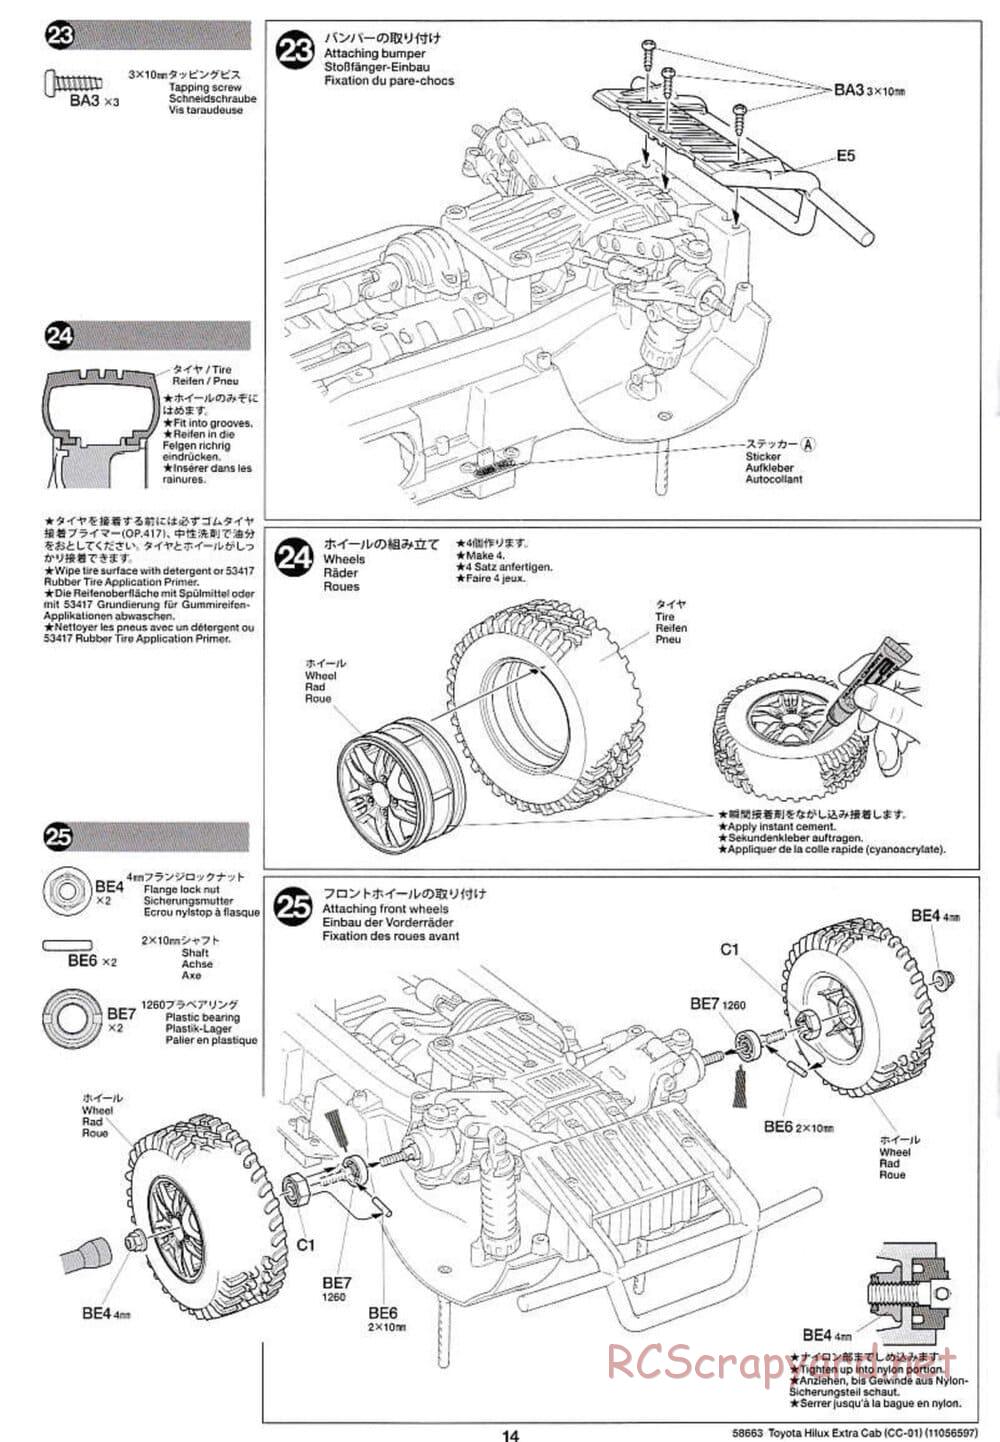 Tamiya - Toyota Hilux Extra Cab - CC-01 Chassis - Manual - Page 14